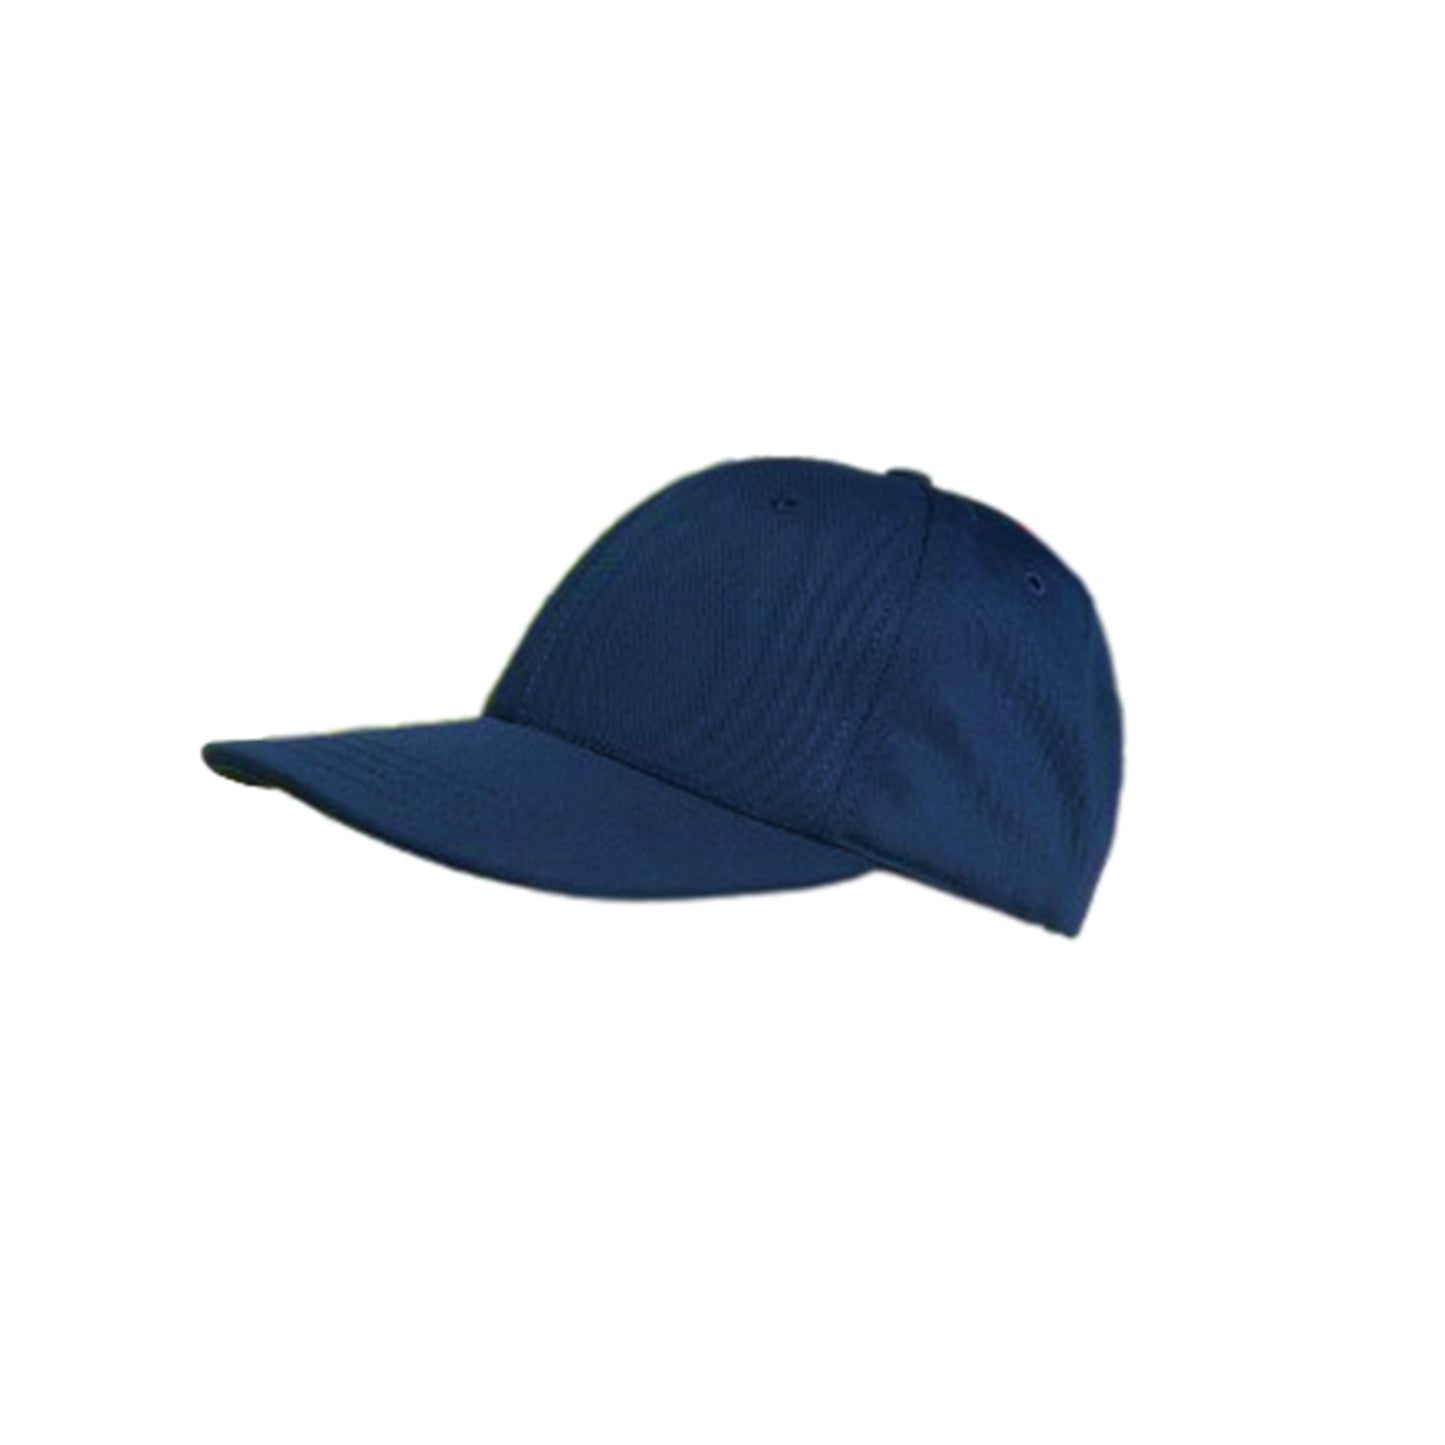 Air Force Blue Baseball Cap (for wear with ABU's) USA Made